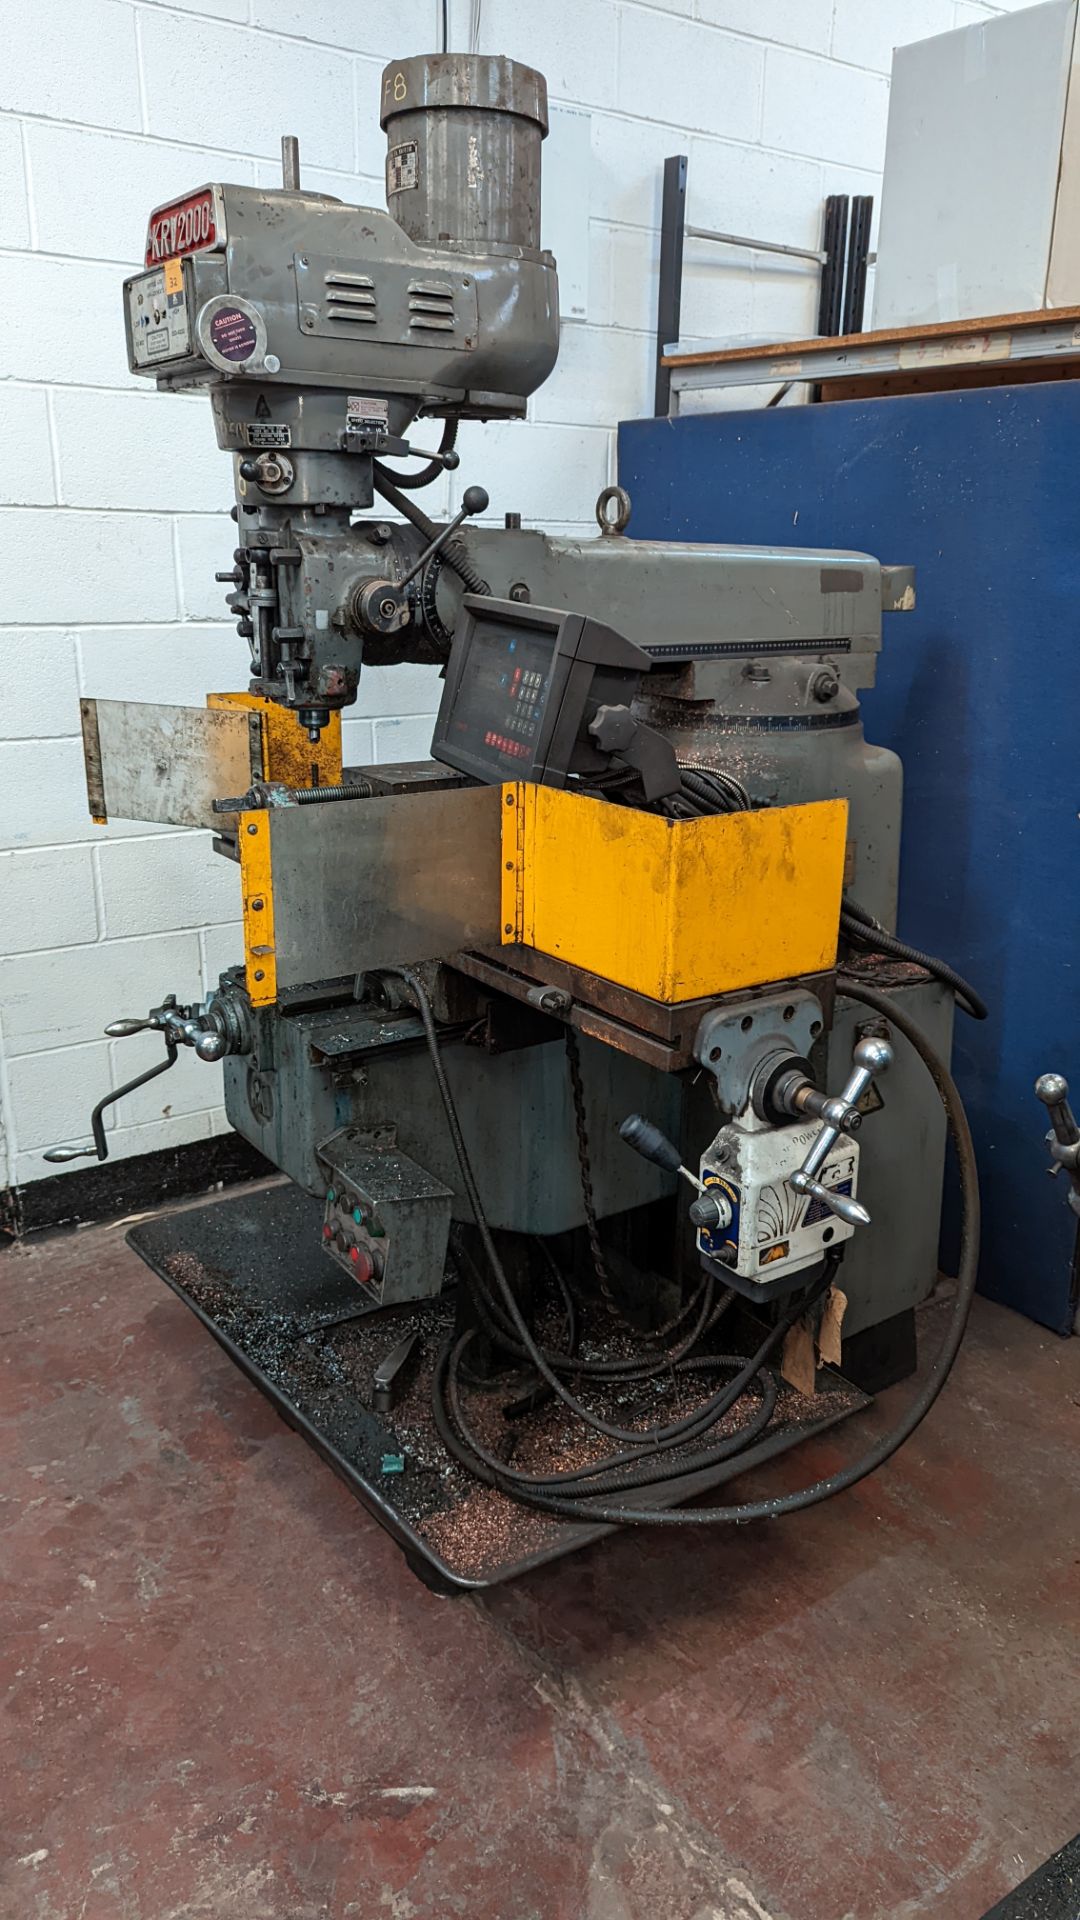 KRV2000 turret milling machine with Newell DP7 DRO & Align CE-500S power feed - Image 10 of 16